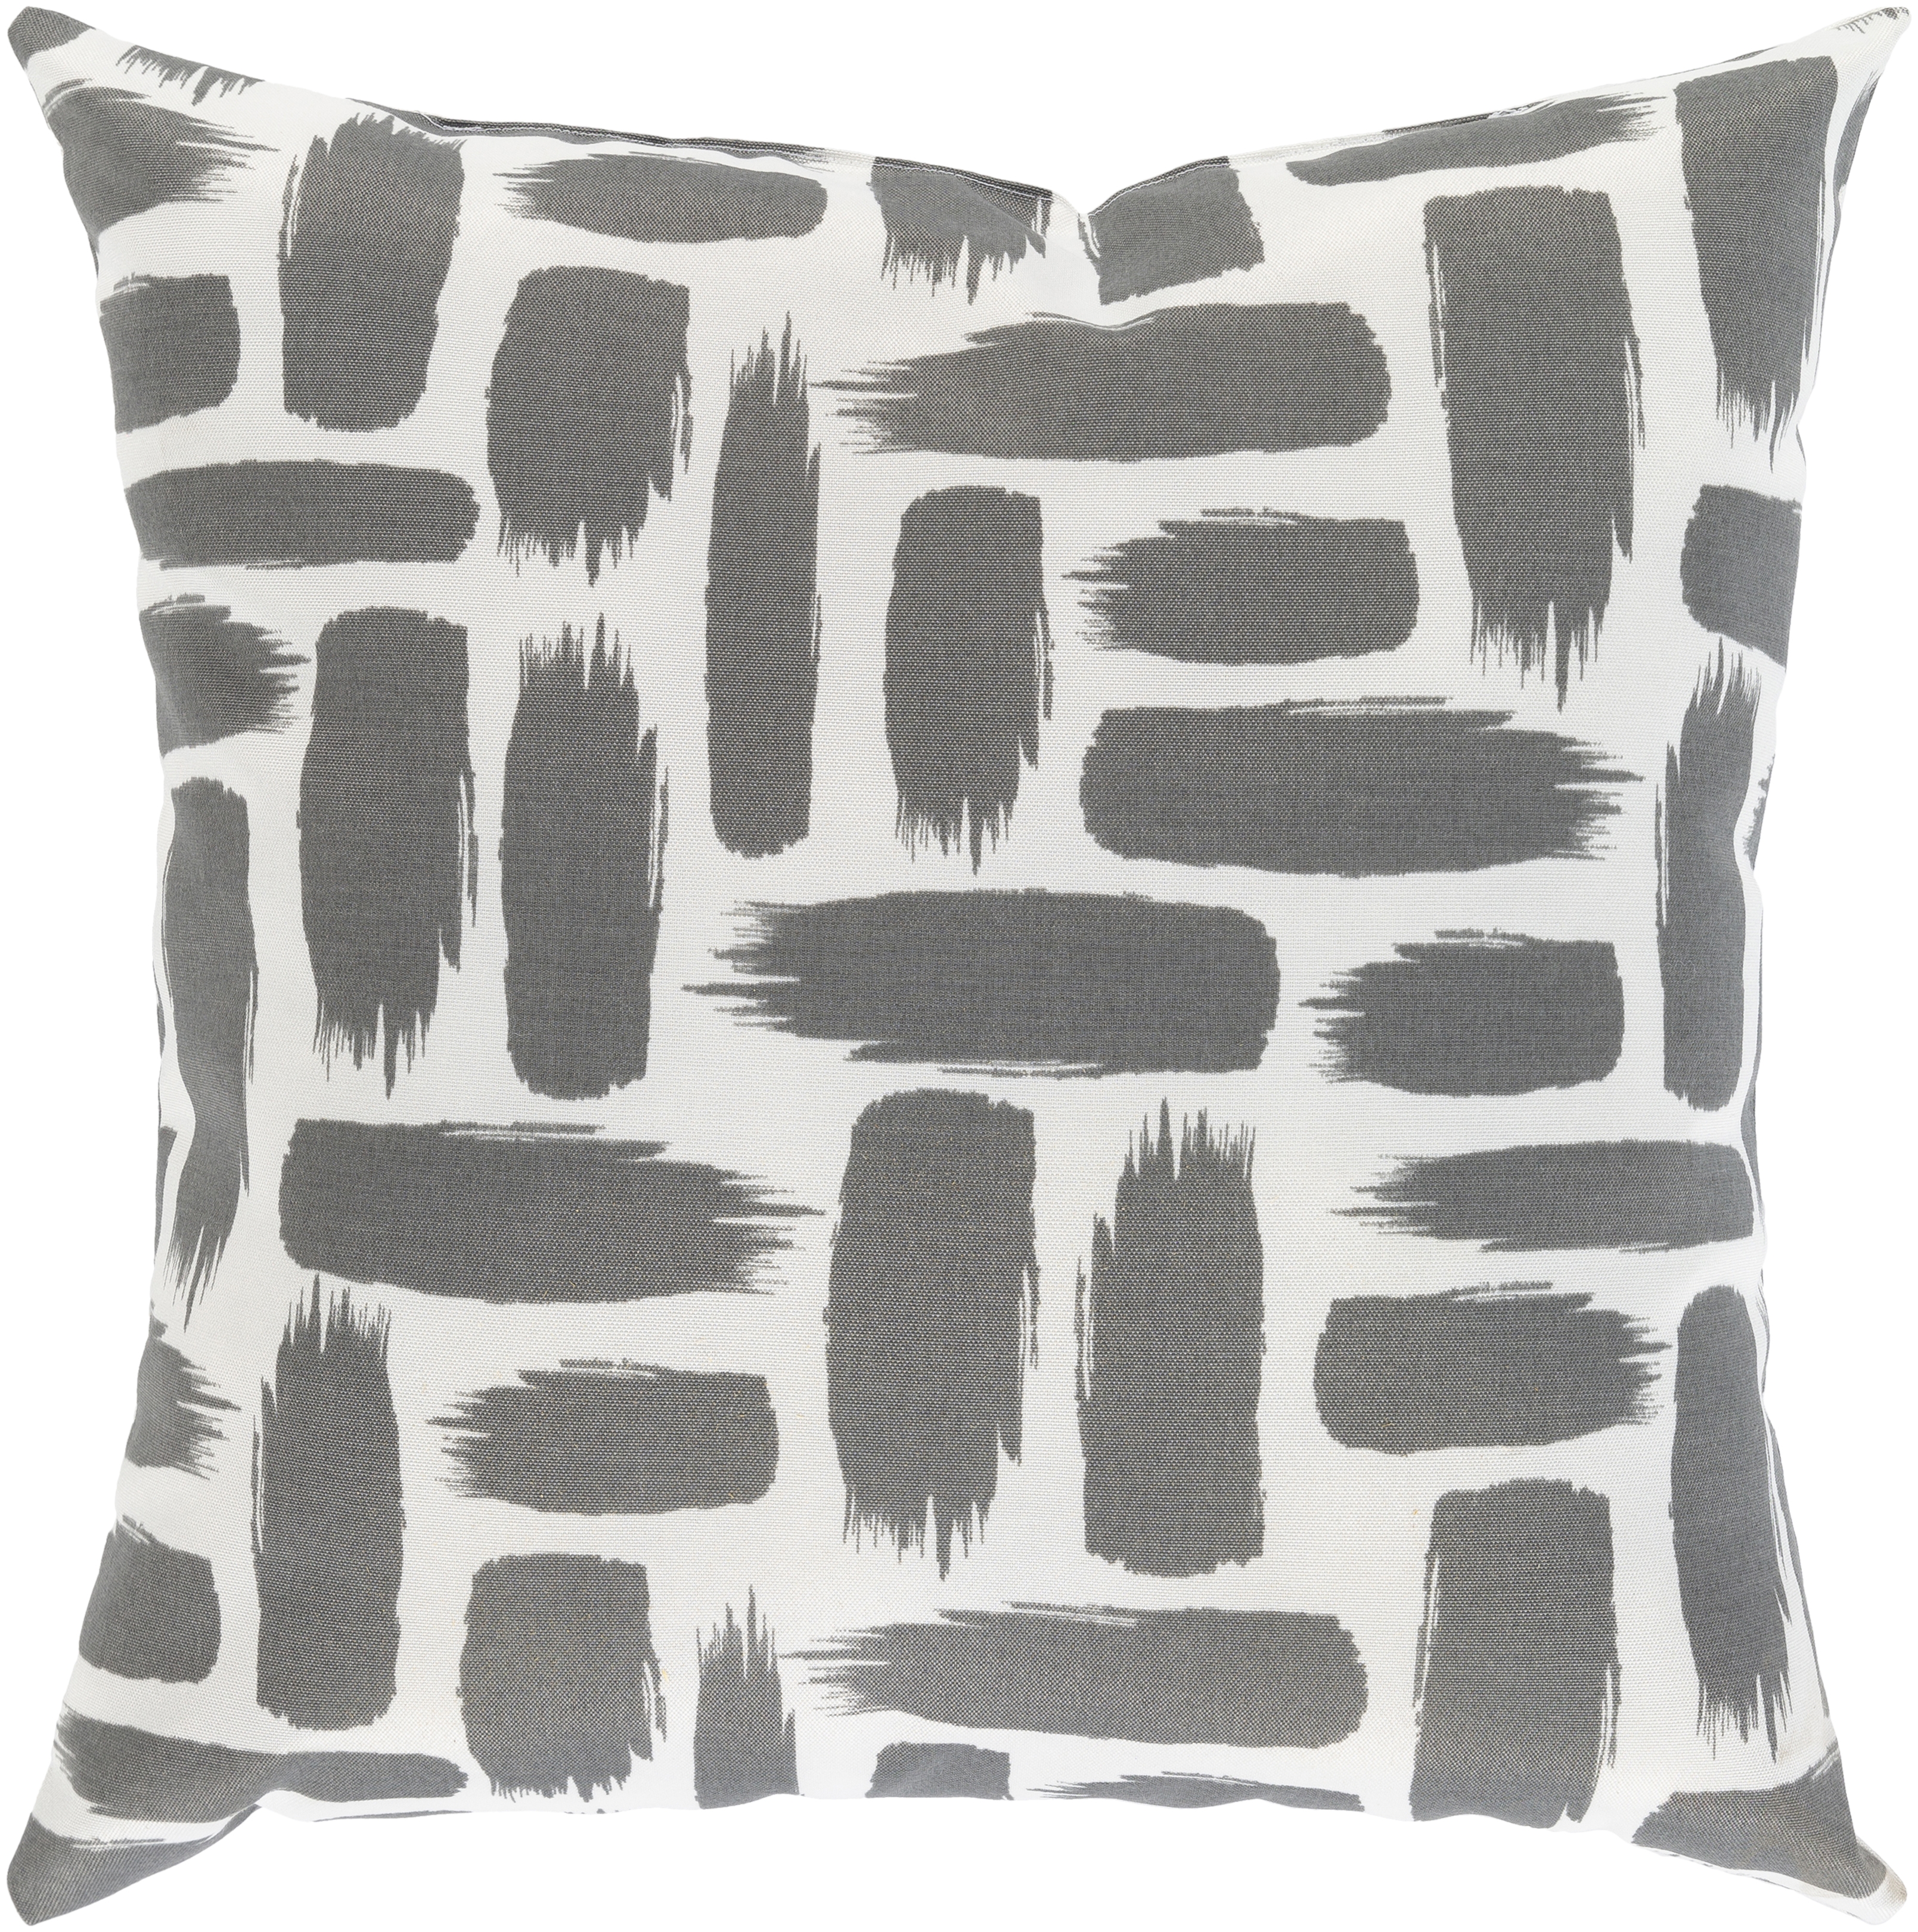 Stroke Throw Pillow, 20" x 20", pillow cover only - Image 0